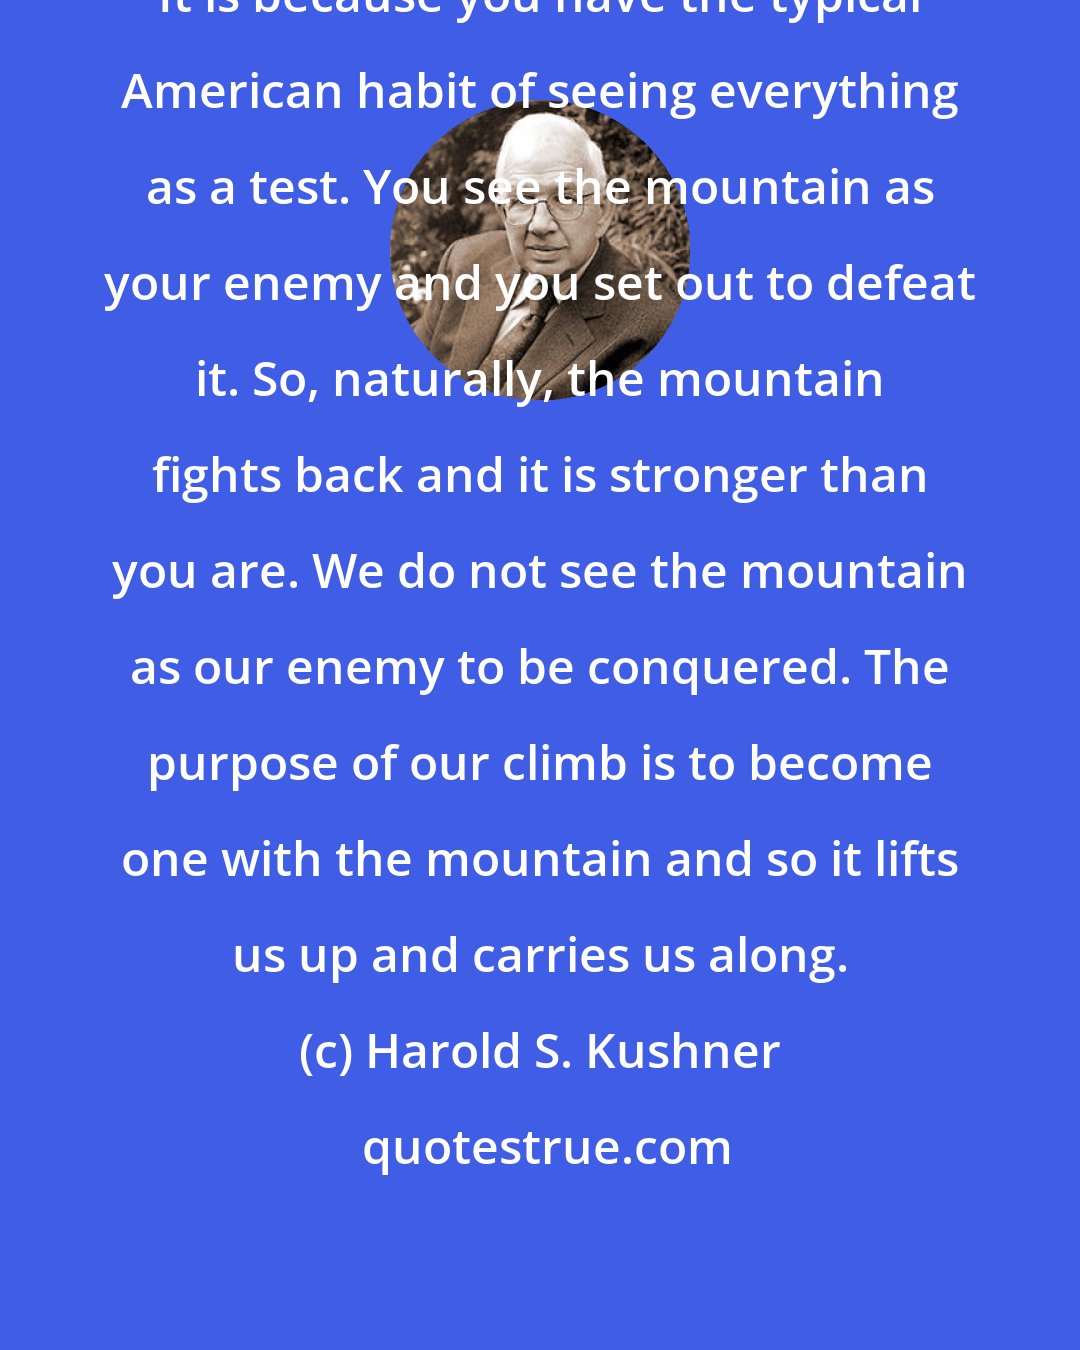 Harold S. Kushner: It is because you have the typical American habit of seeing everything as a test. You see the mountain as your enemy and you set out to defeat it. So, naturally, the mountain fights back and it is stronger than you are. We do not see the mountain as our enemy to be conquered. The purpose of our climb is to become one with the mountain and so it lifts us up and carries us along.